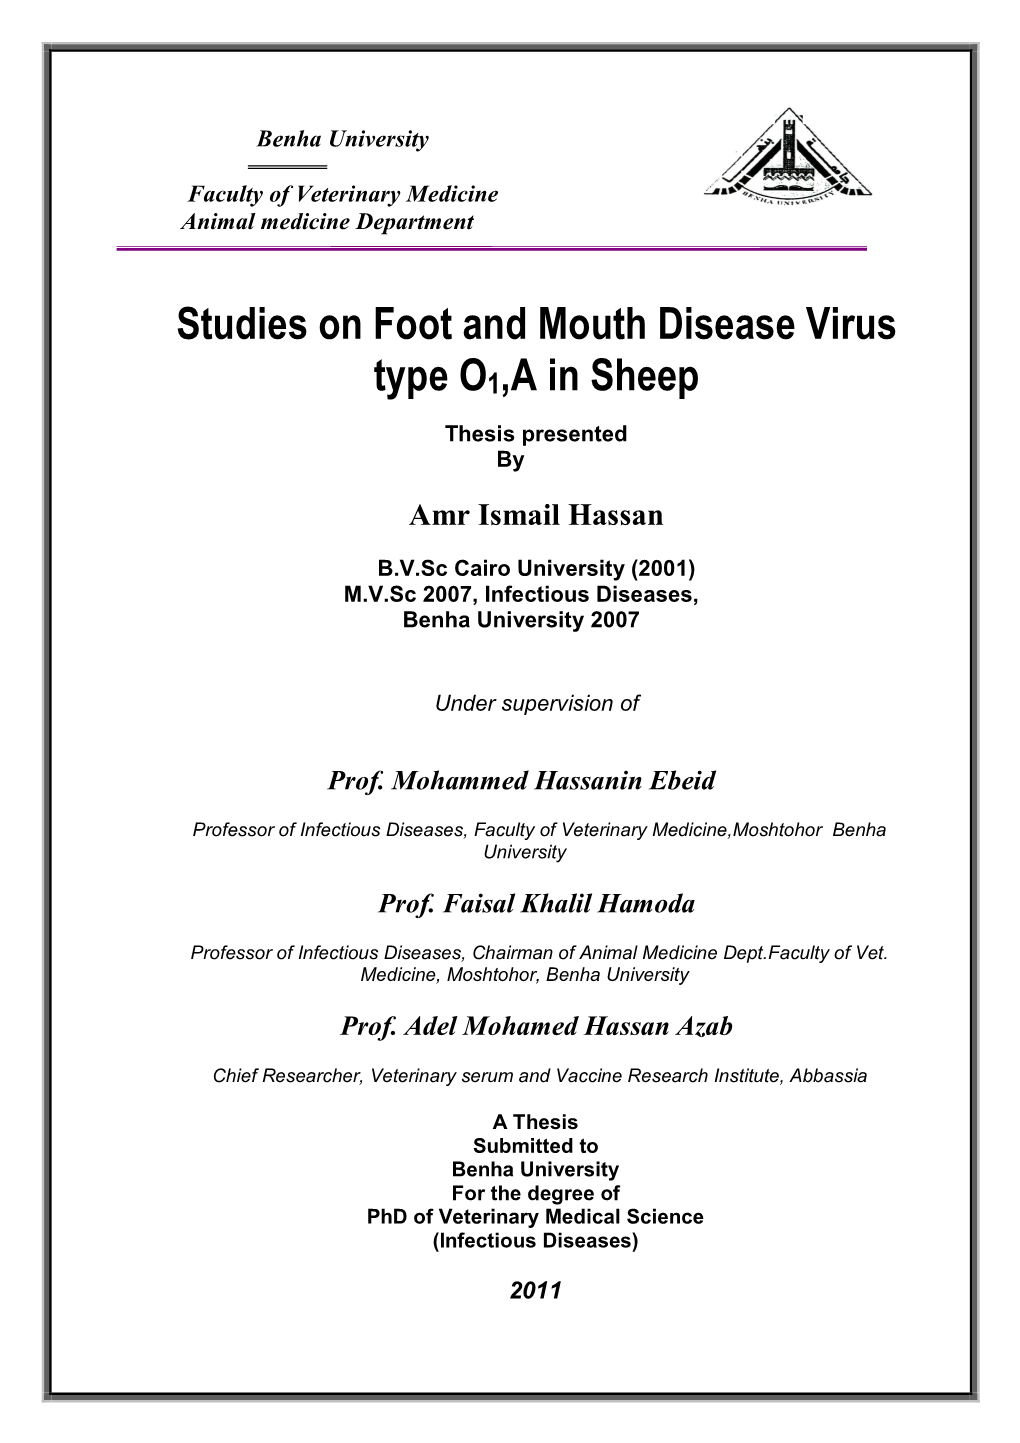 Studies on Foot and Mouth Disease Virus Type O1,A in Sheep